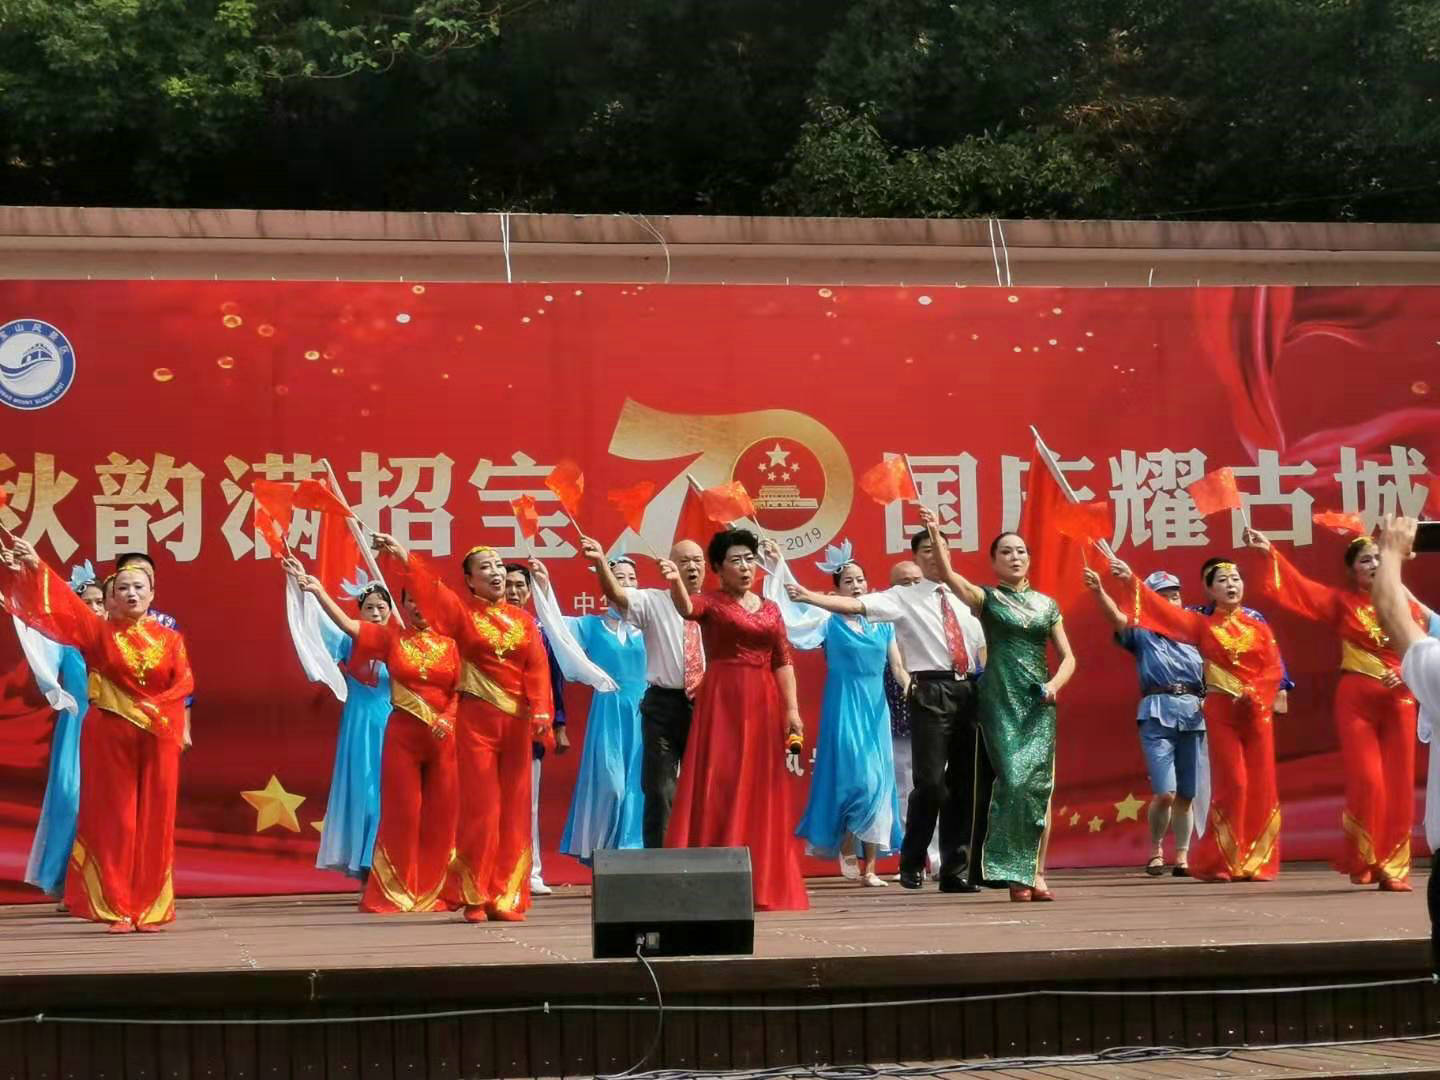 Zhaobaoshan National Day activities are splendid and popular! This is the correct way to open the National Day holiday!